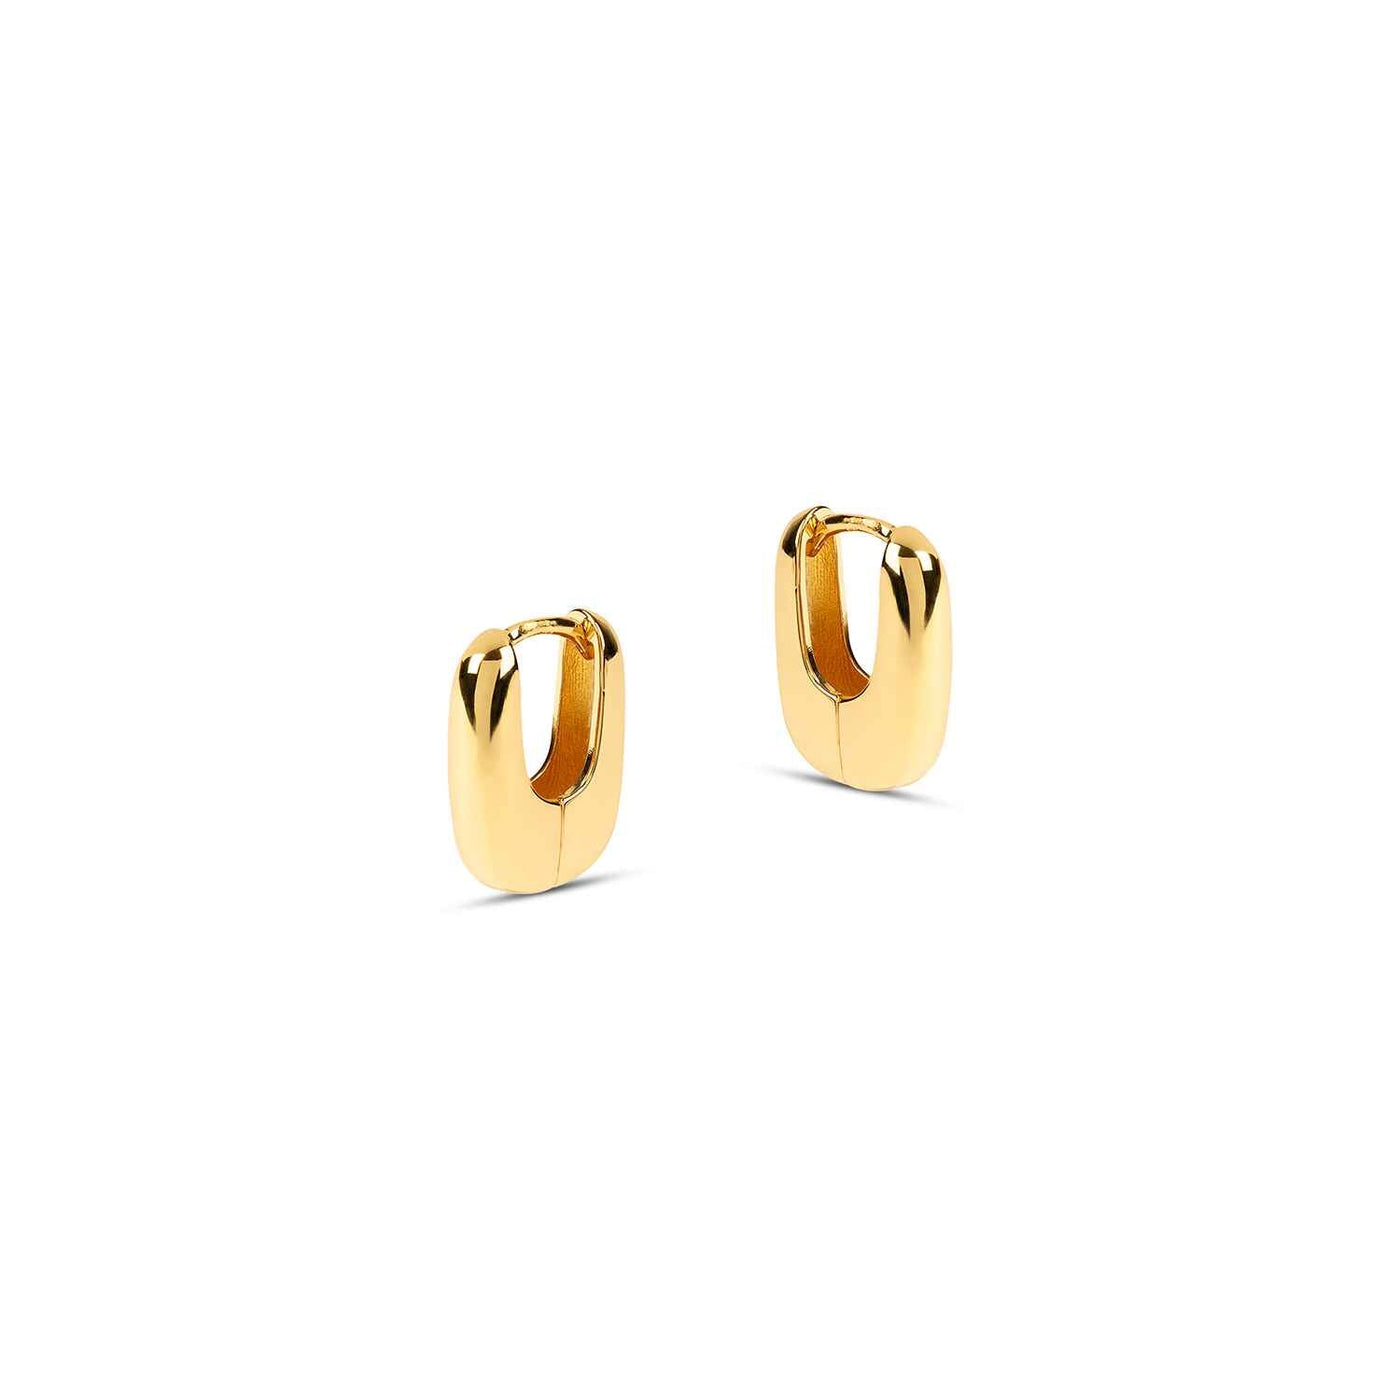 You can never go wrong with our Bella Mini Geometric Gold Earrings. Golden &amp; elegant, and yet playful! Perfectly shaped to hug your earlobes.&nbsp;